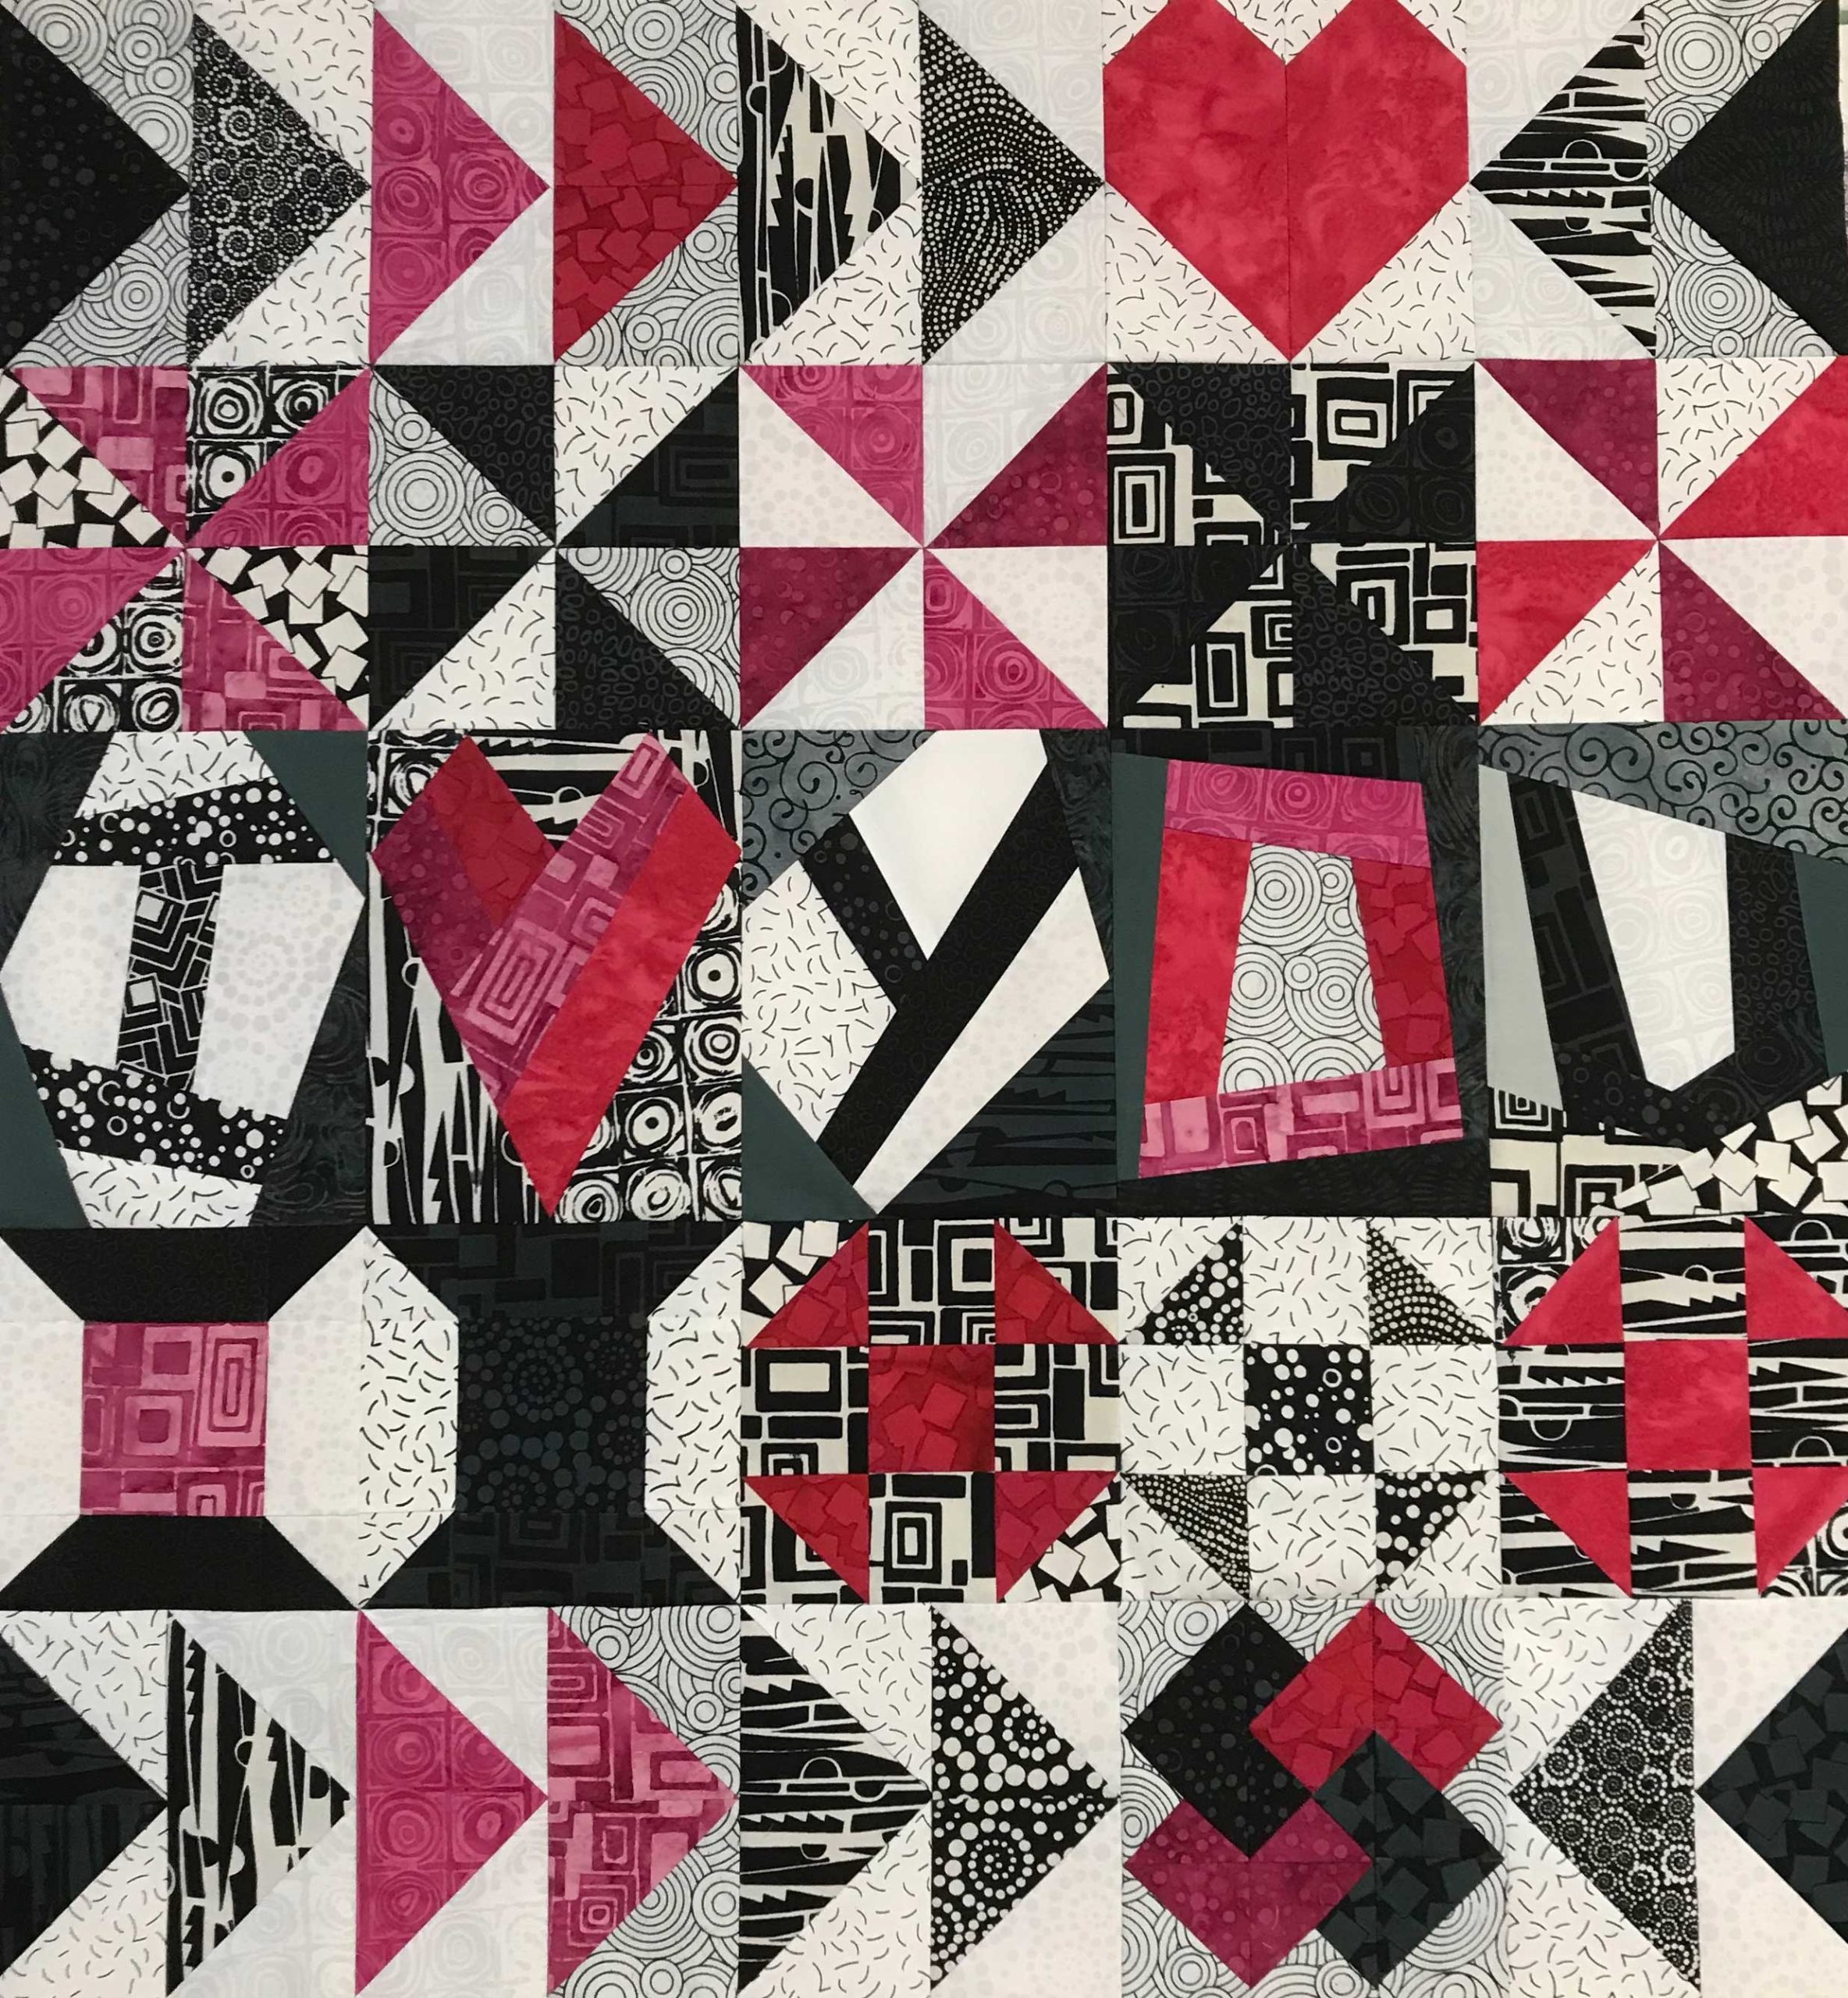 A row quilt, “I Love You,”